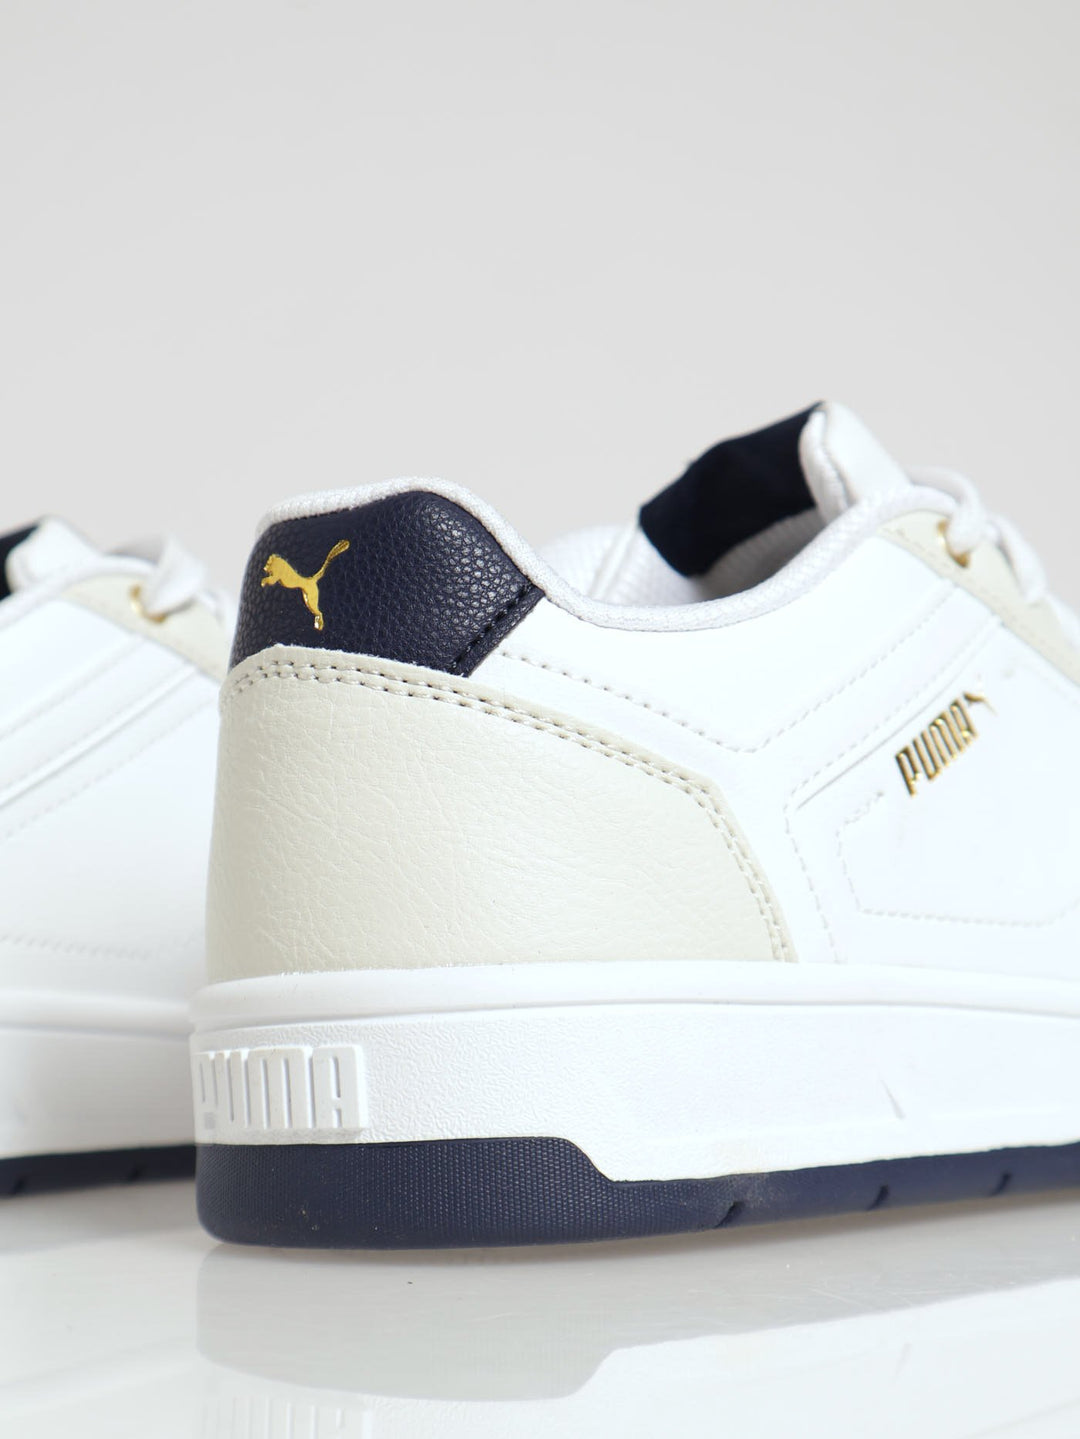 Court Classic Closed Toe Lace Up Sneaker - White/Navy